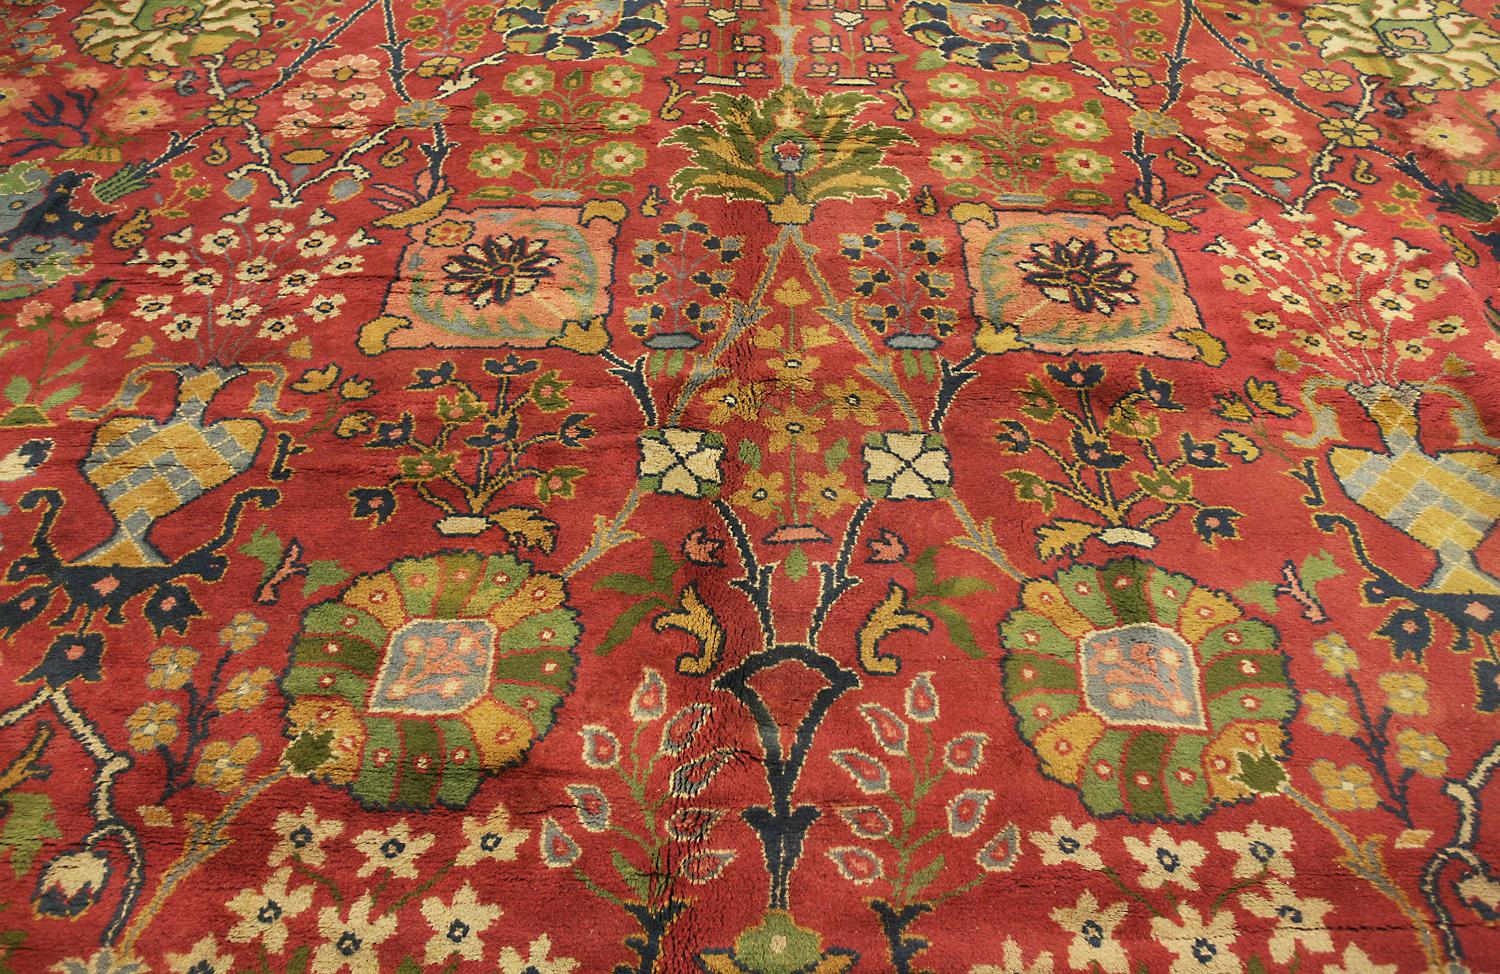 Circa 1920 Oversized Antique English Wool Donegal Carpet, Red Field For Sale 4